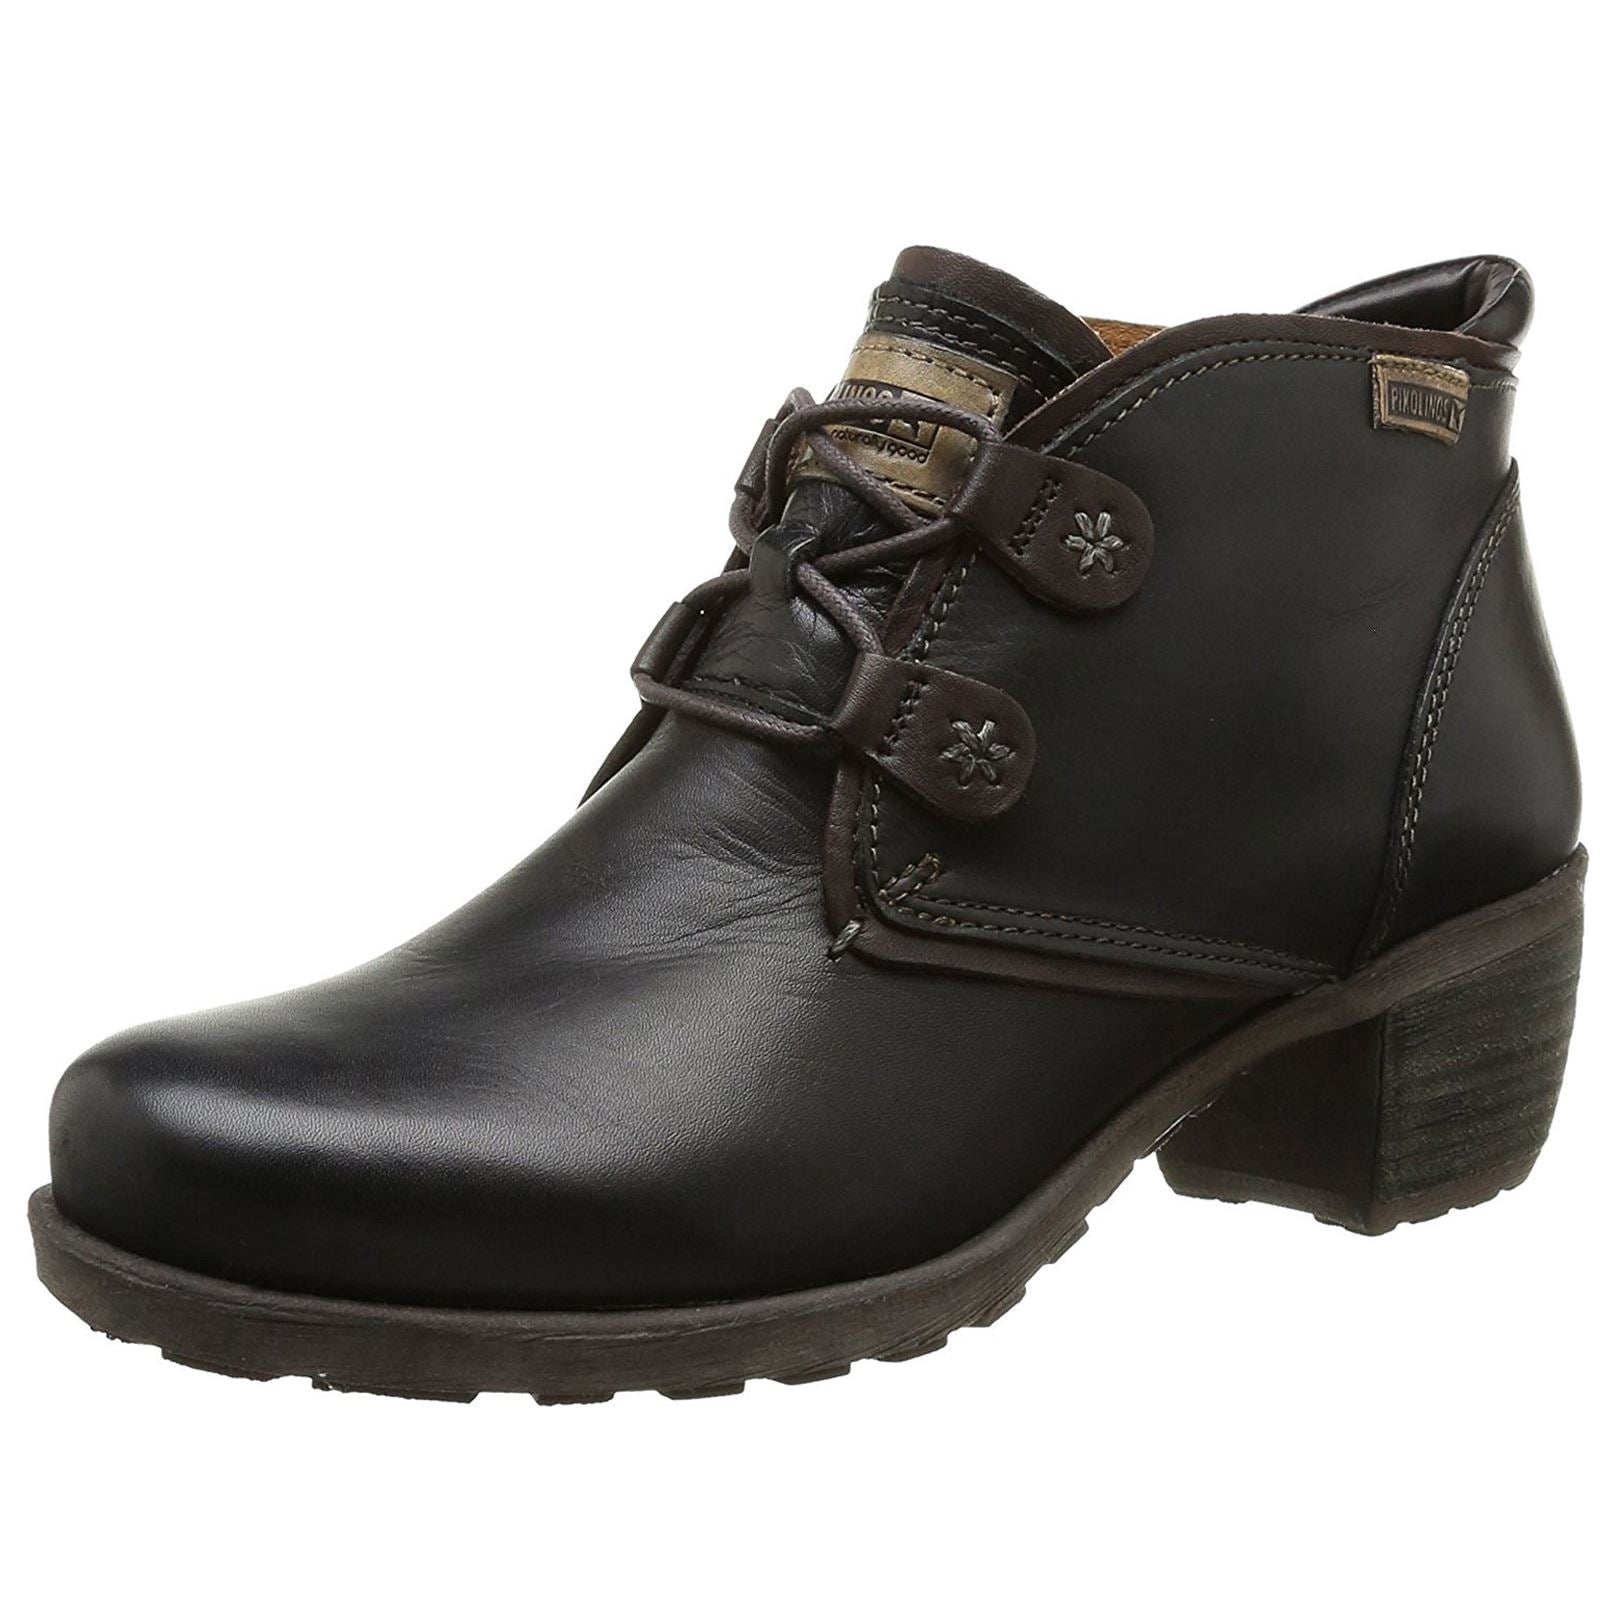 Pikolinos Le Mans 838-8657 Black Womens Leather Boots - UK 4-4.5